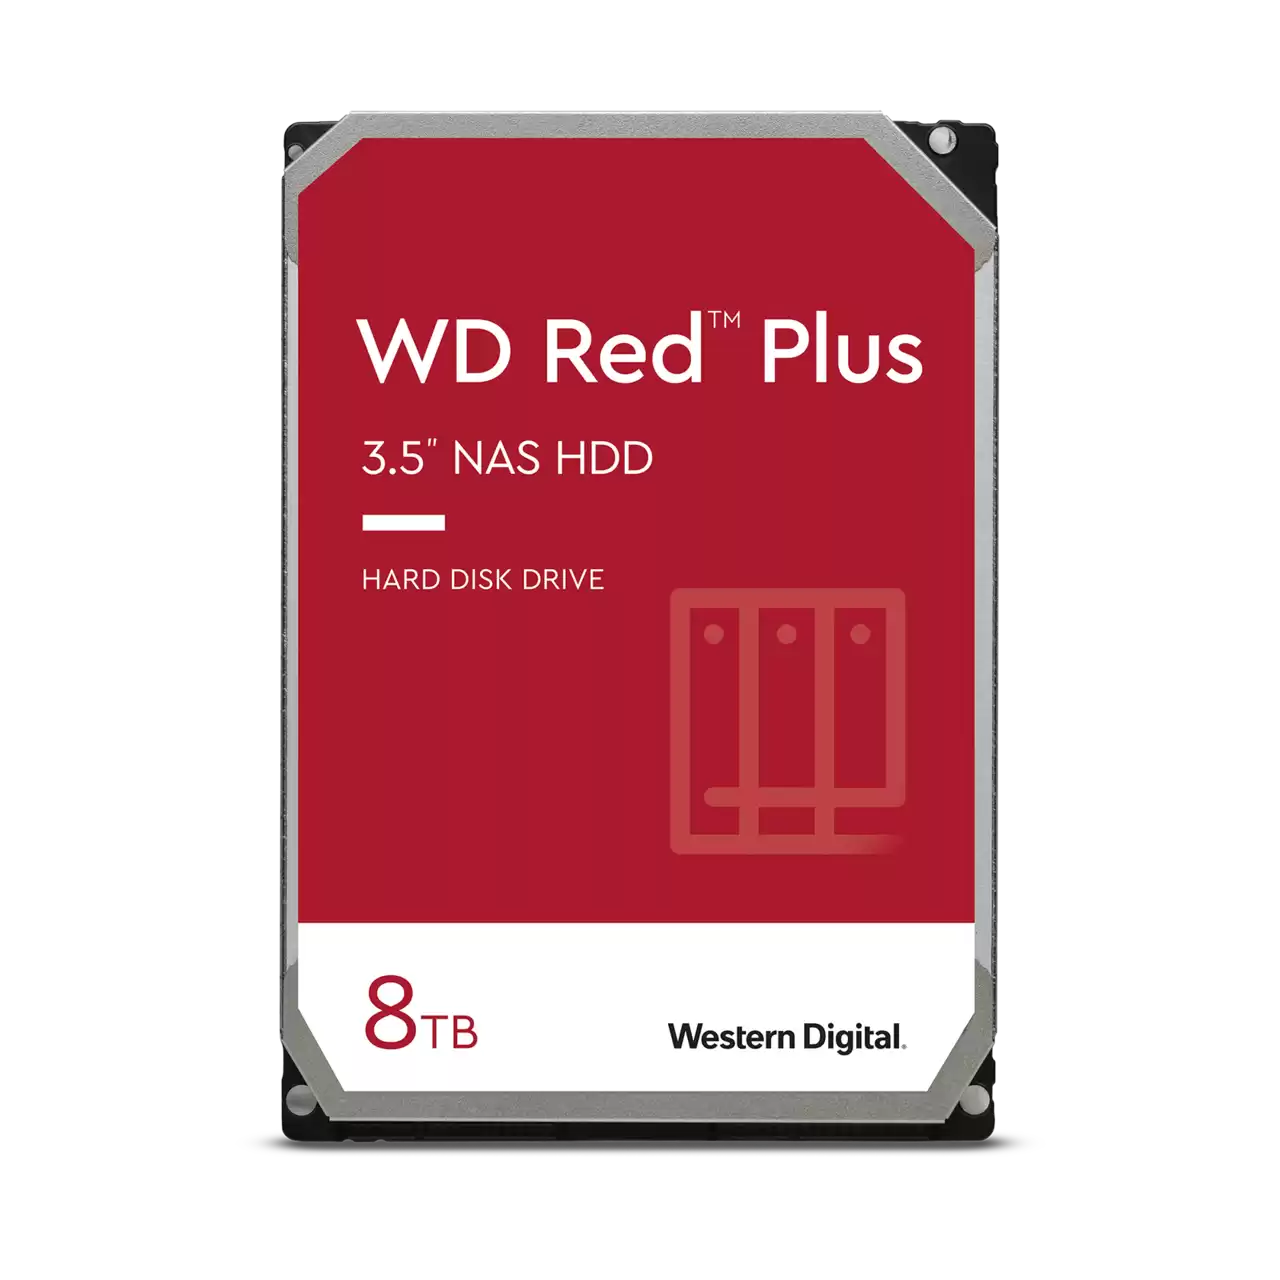 WD Red WD80EFZZ Plus CMR 8TB SATA 3.5 128 MB Cache HDD